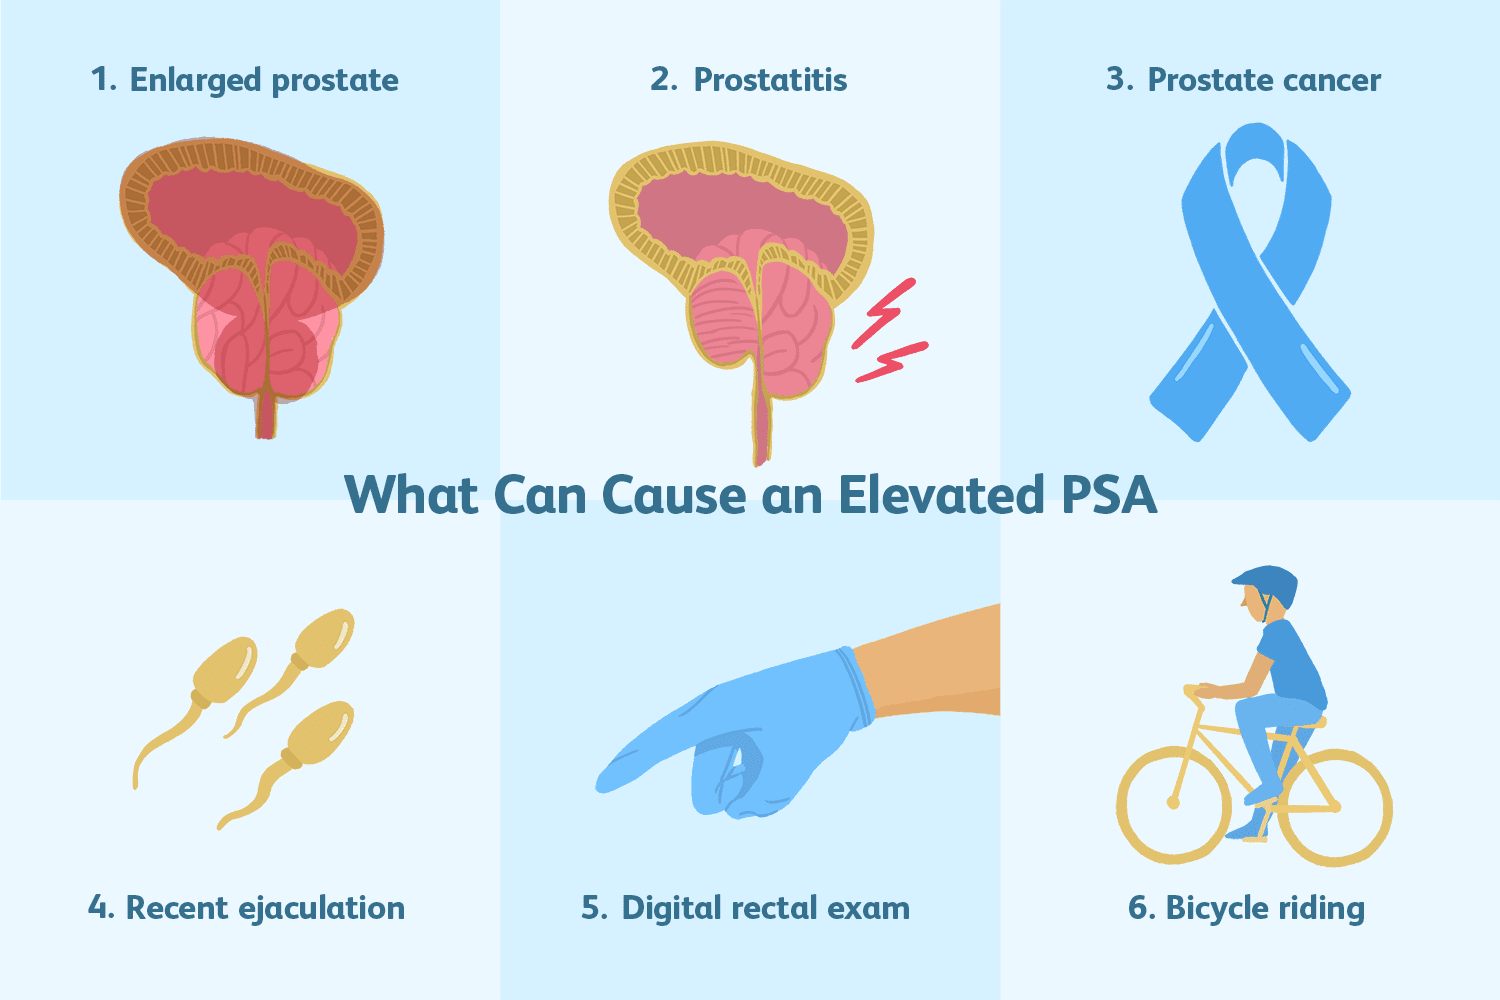 Does Heterogeneous Prostate Mean Cancer?